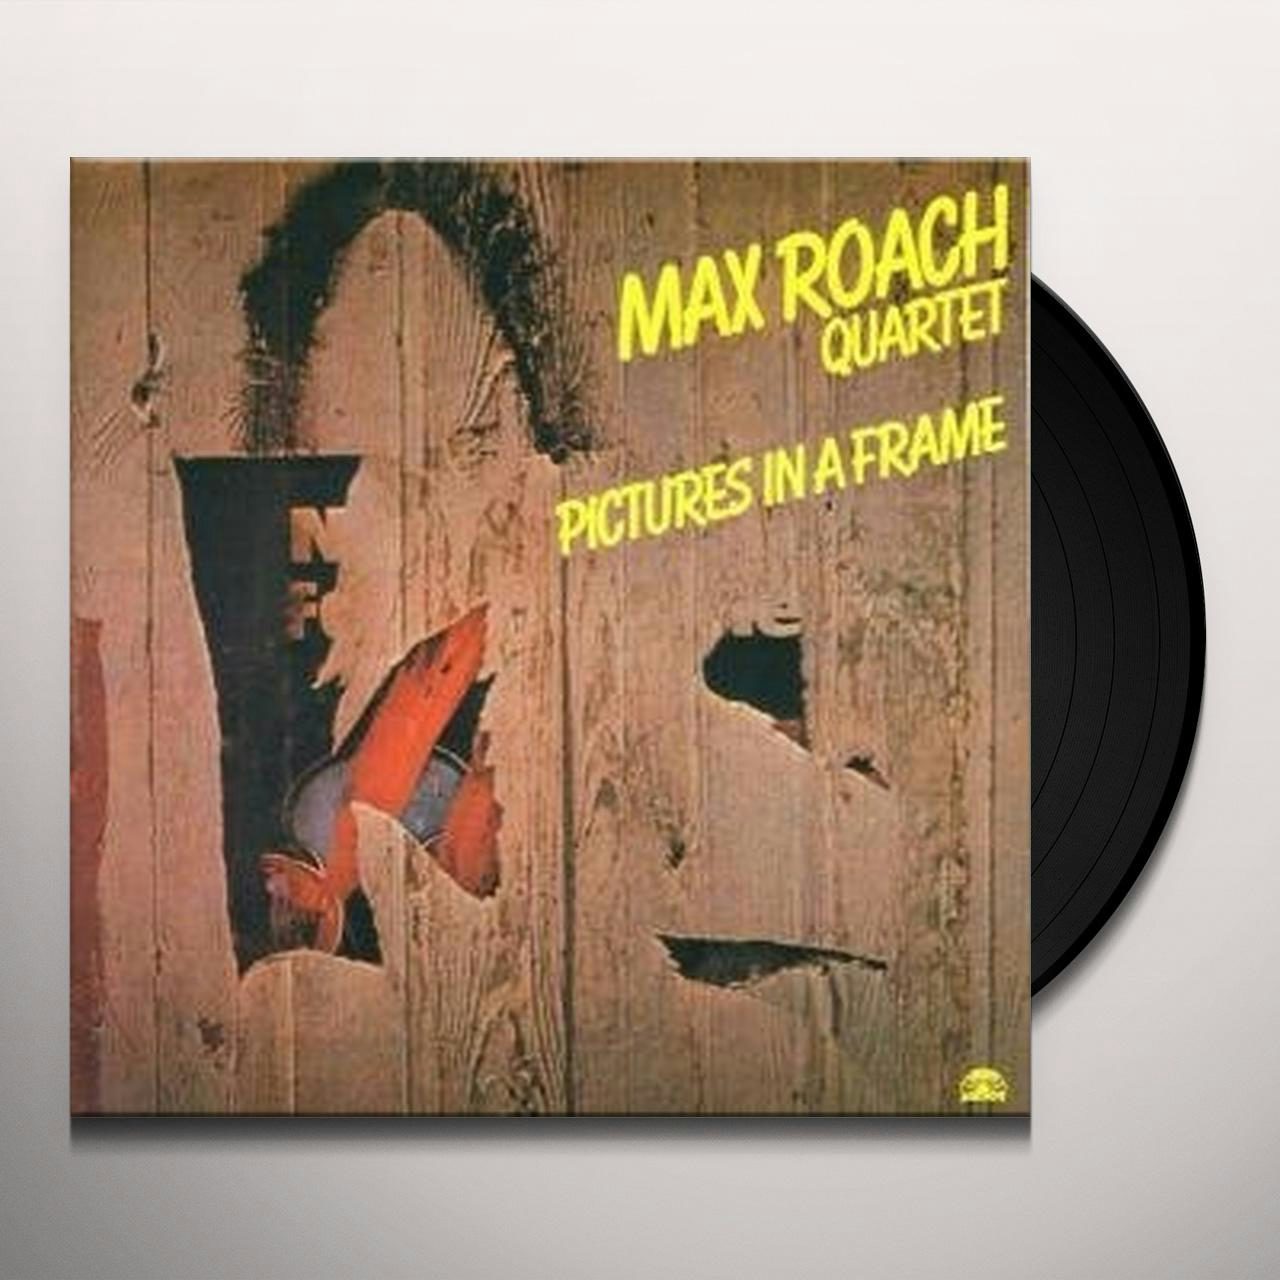 PICTURES IN A FRAME Vinyl Record - Max Roach